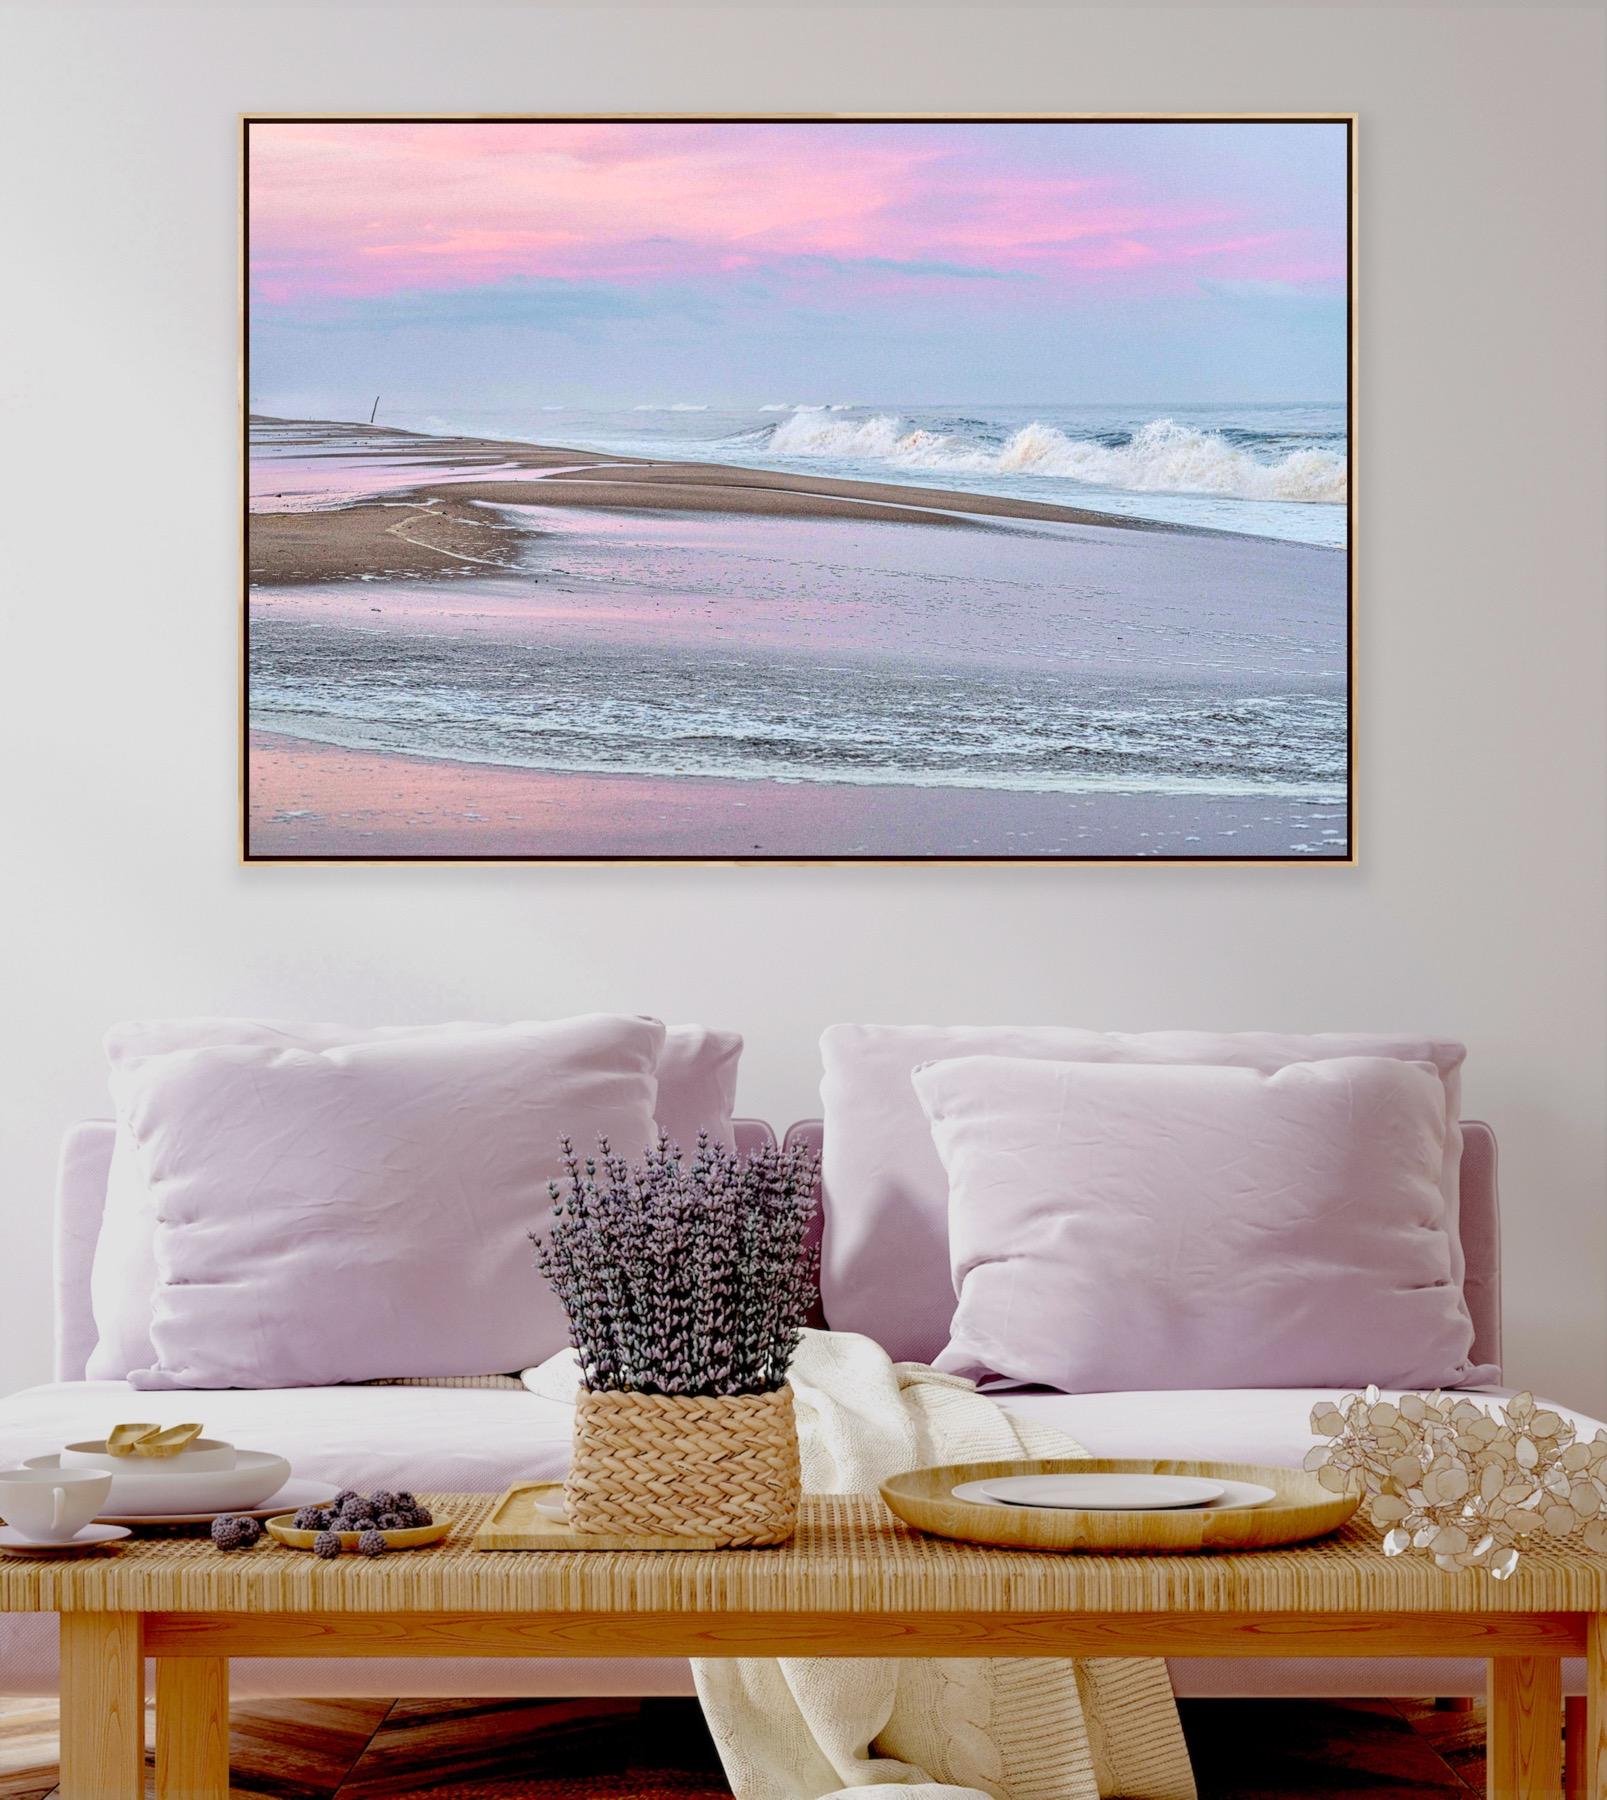 A distant hurricane combined with a full blue moon created a massive storm surge, contrasted by the peaceful early fall dusk. 

Printed on archival fine art paper, mounted on dibond aluminum with a float mount backing. Available in a wide variety of